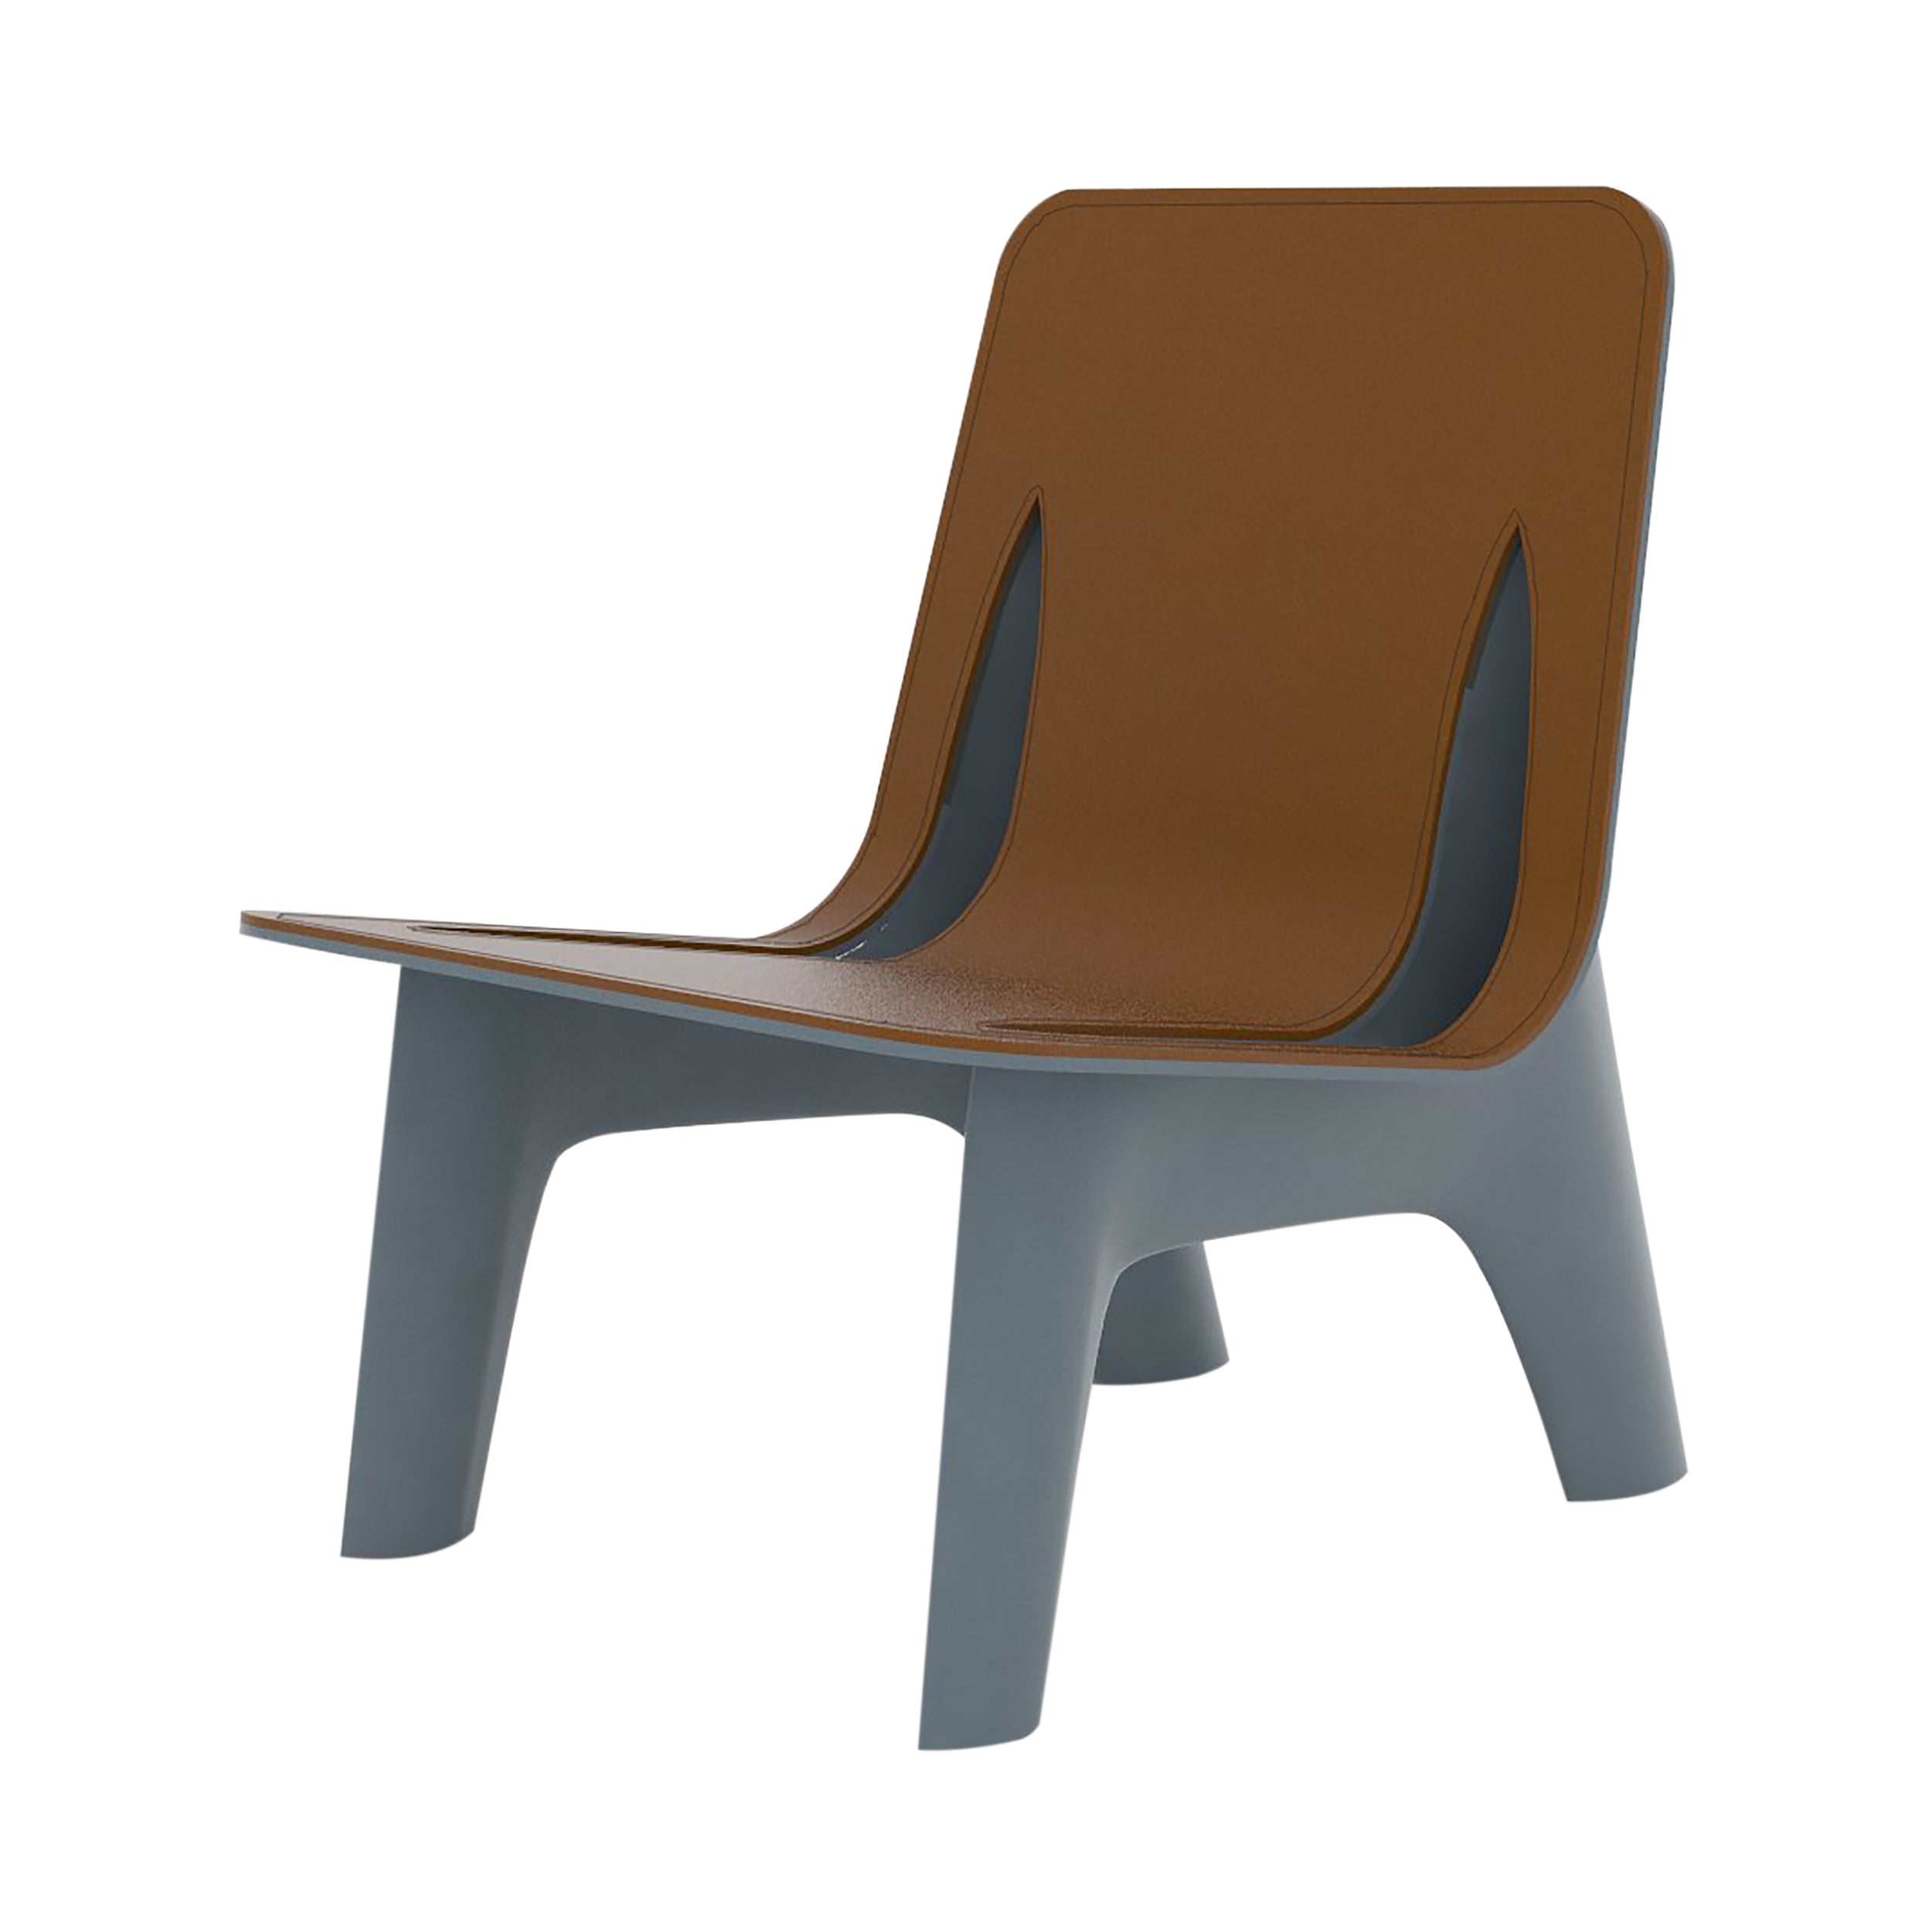 J-Chair: Leather Seat + Aluminum + Grey Blue